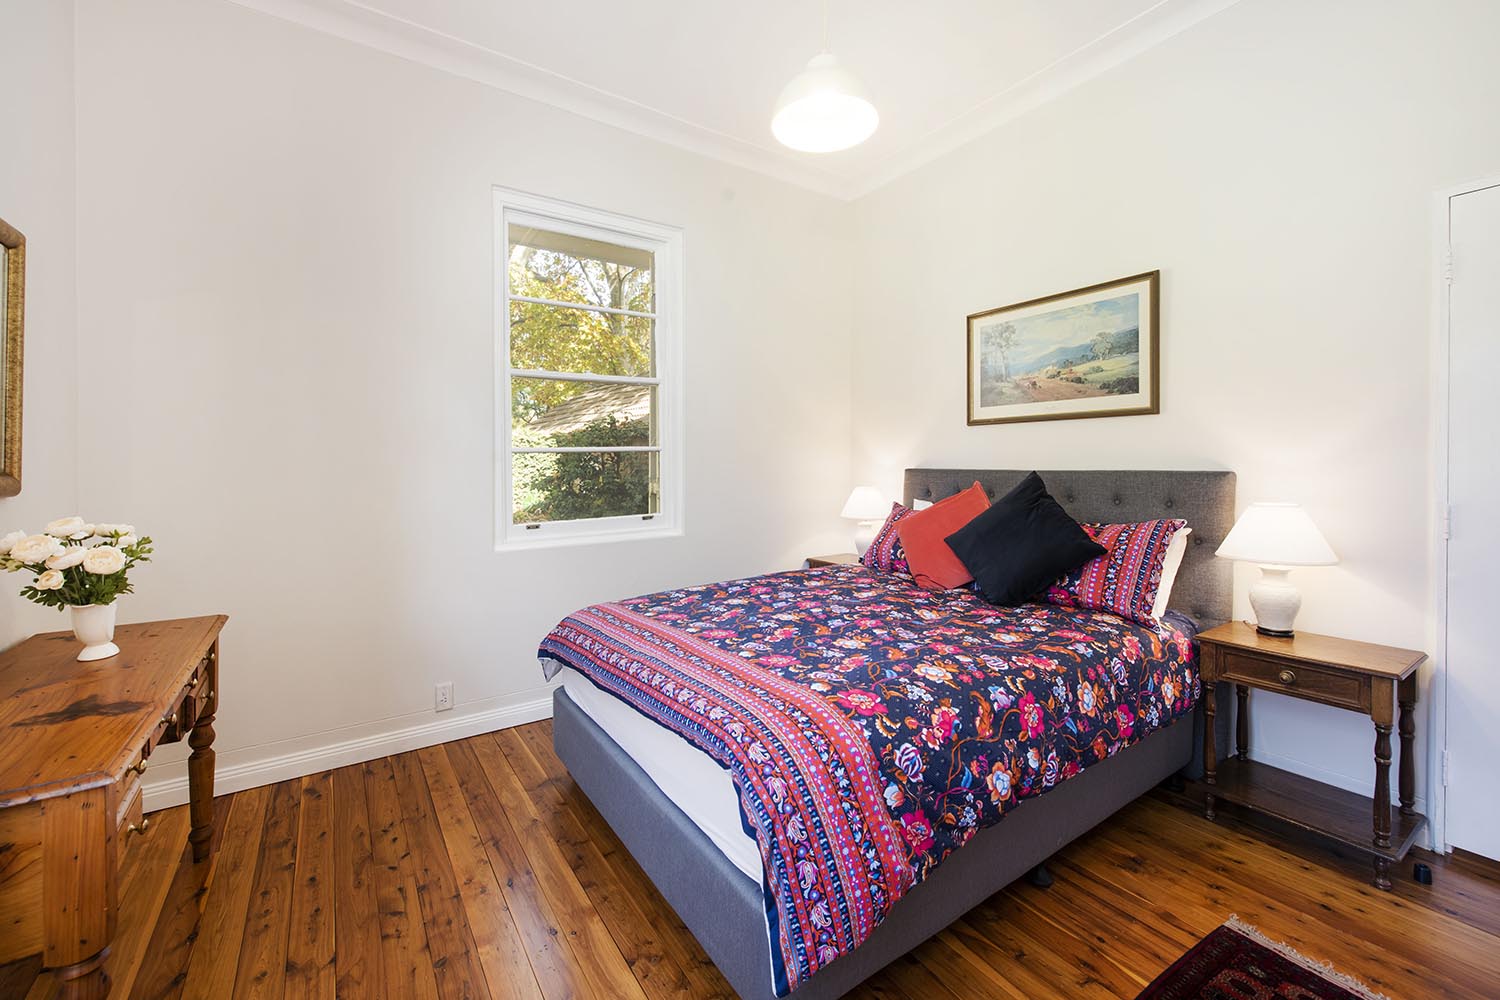 7-heaton-cottage-bedroom-12-guests-mudgee-accommodation-cottage-antiques